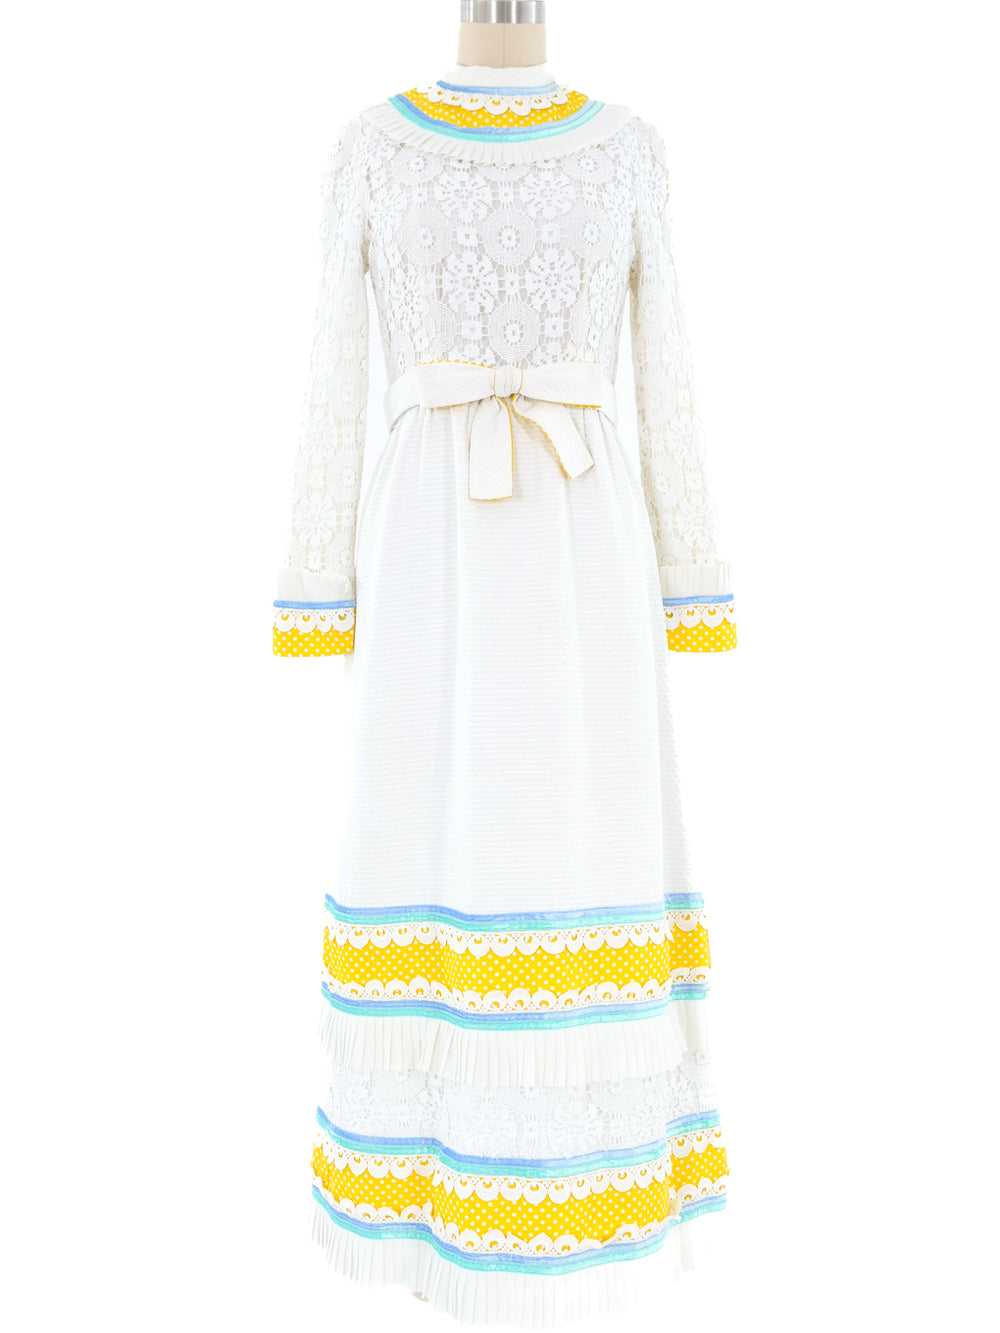 1970's Malcolm Starr Tiered Lace Dress - image 1